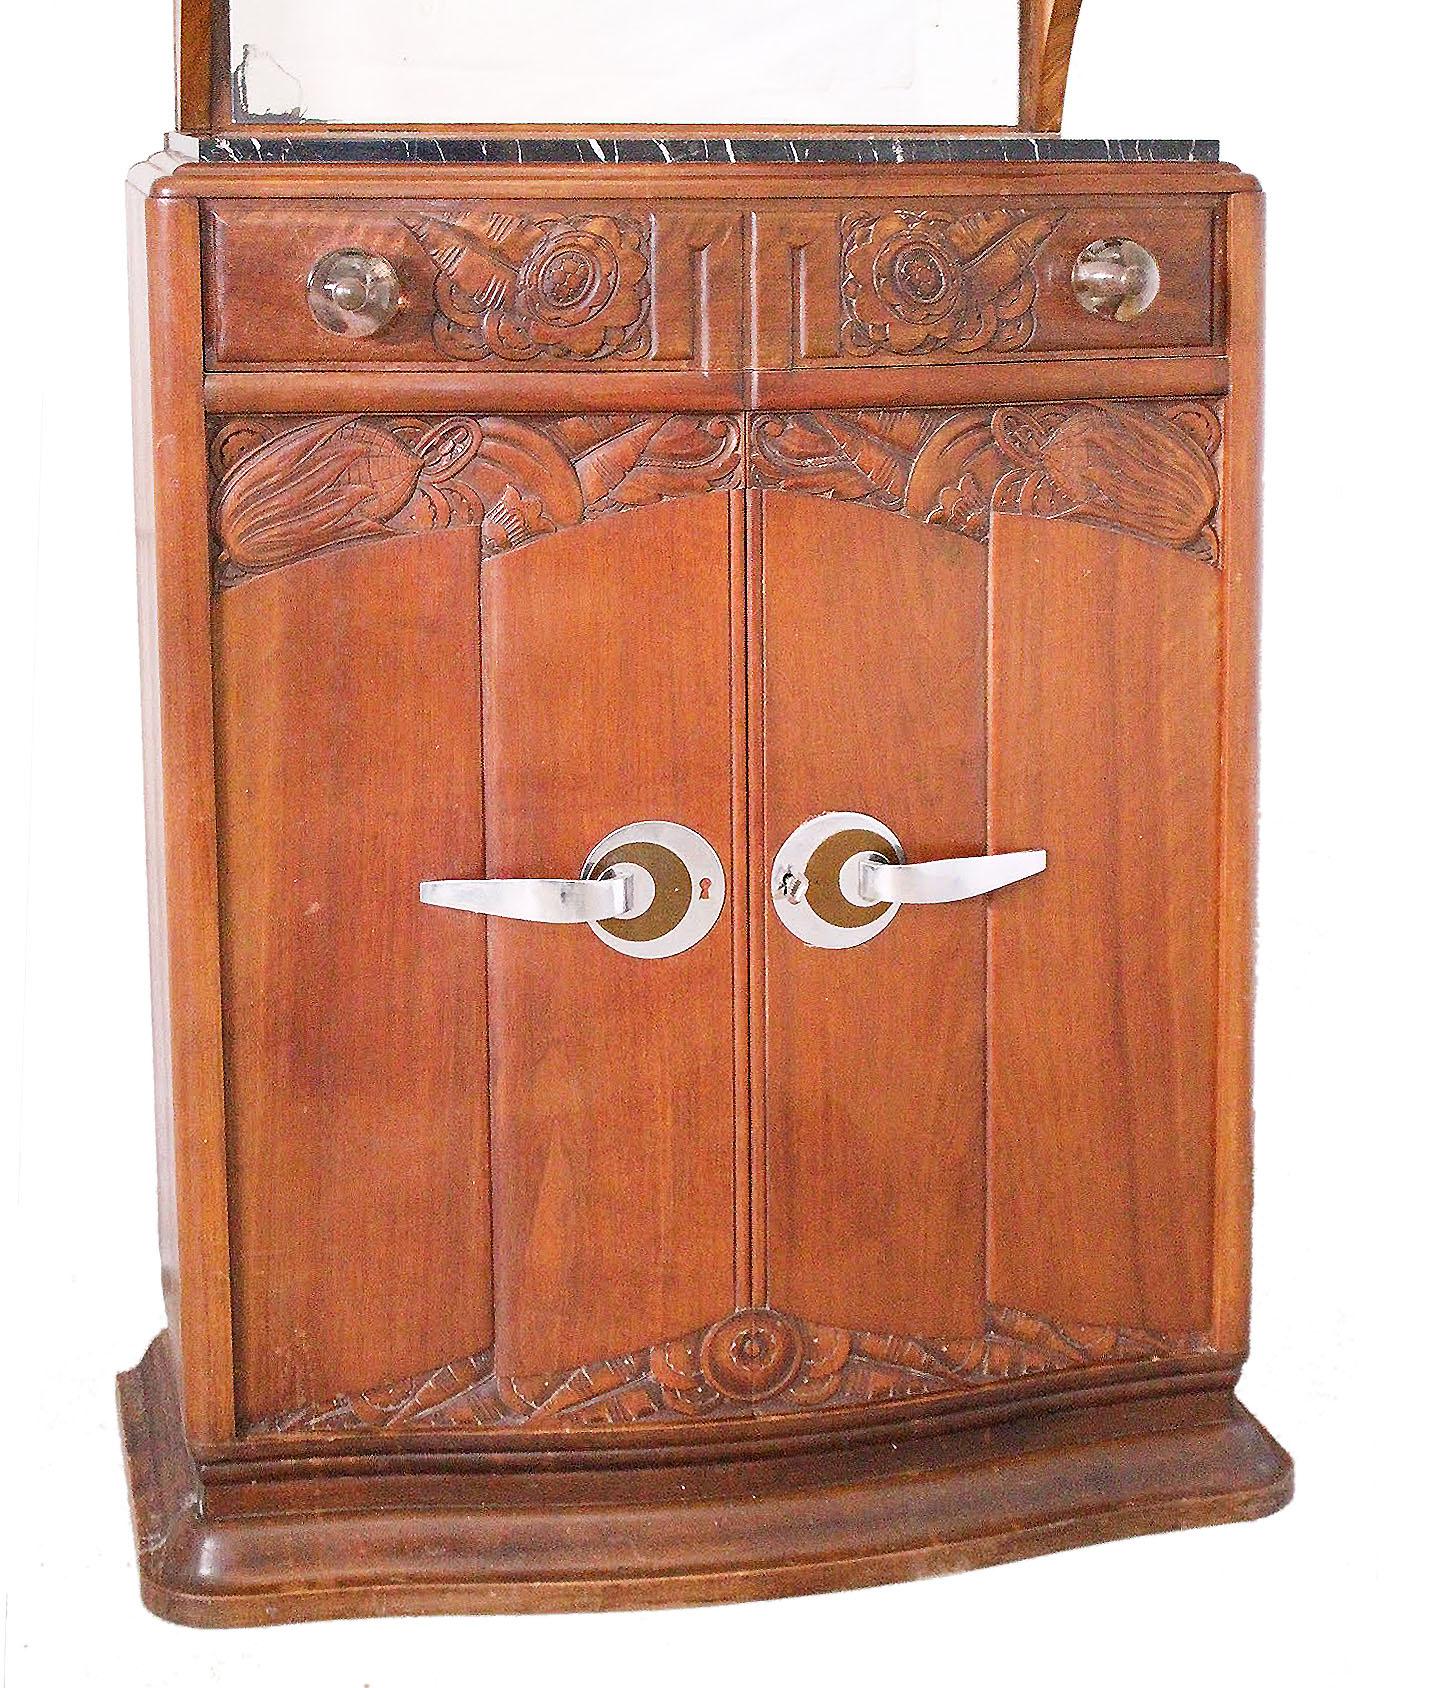 Art Deco vitrine credenza sideboard cabinet, circa 1930 
All original
Very unusual
Carved floral motifs
Mirror back and variegated black marble
Glass cabinet
A small mistake in the title : this Cabinet is of walnut
Please see Art Deco Credenza